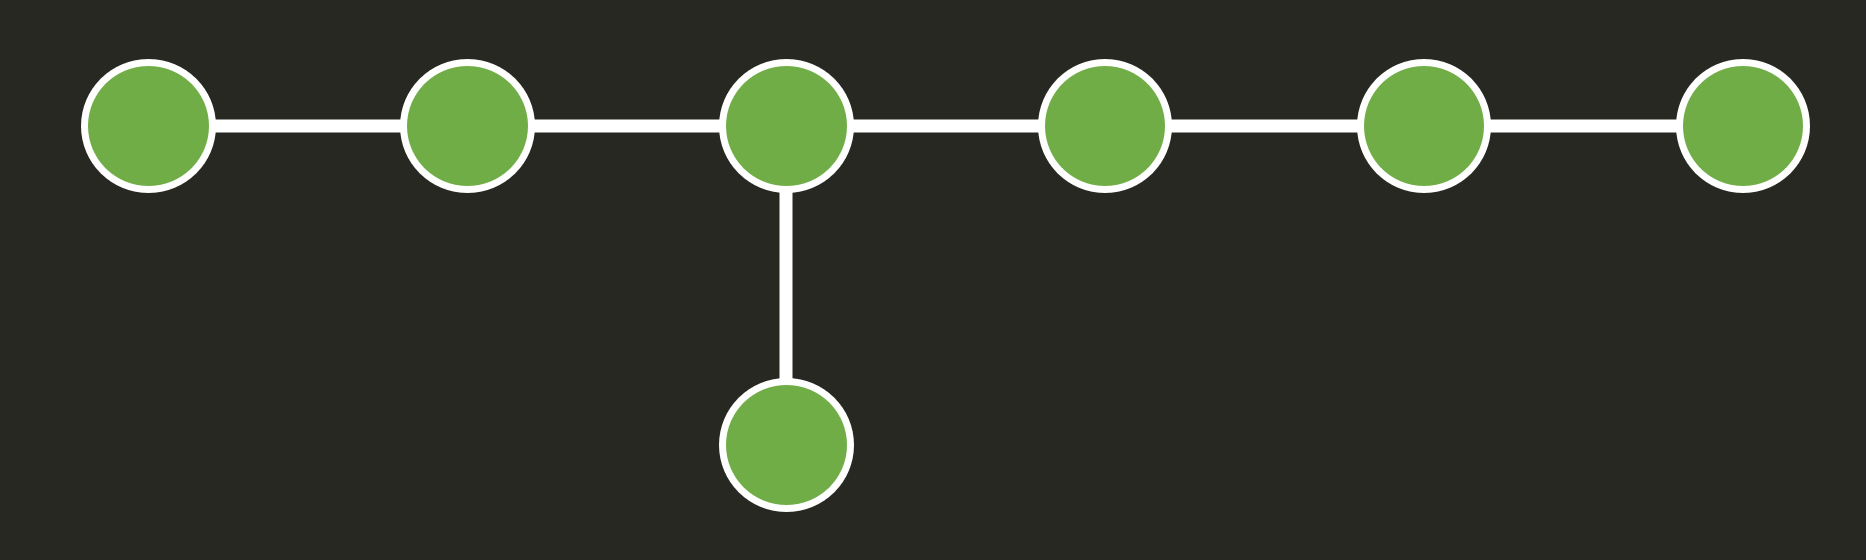 Asymmetric tree with 7 vertices